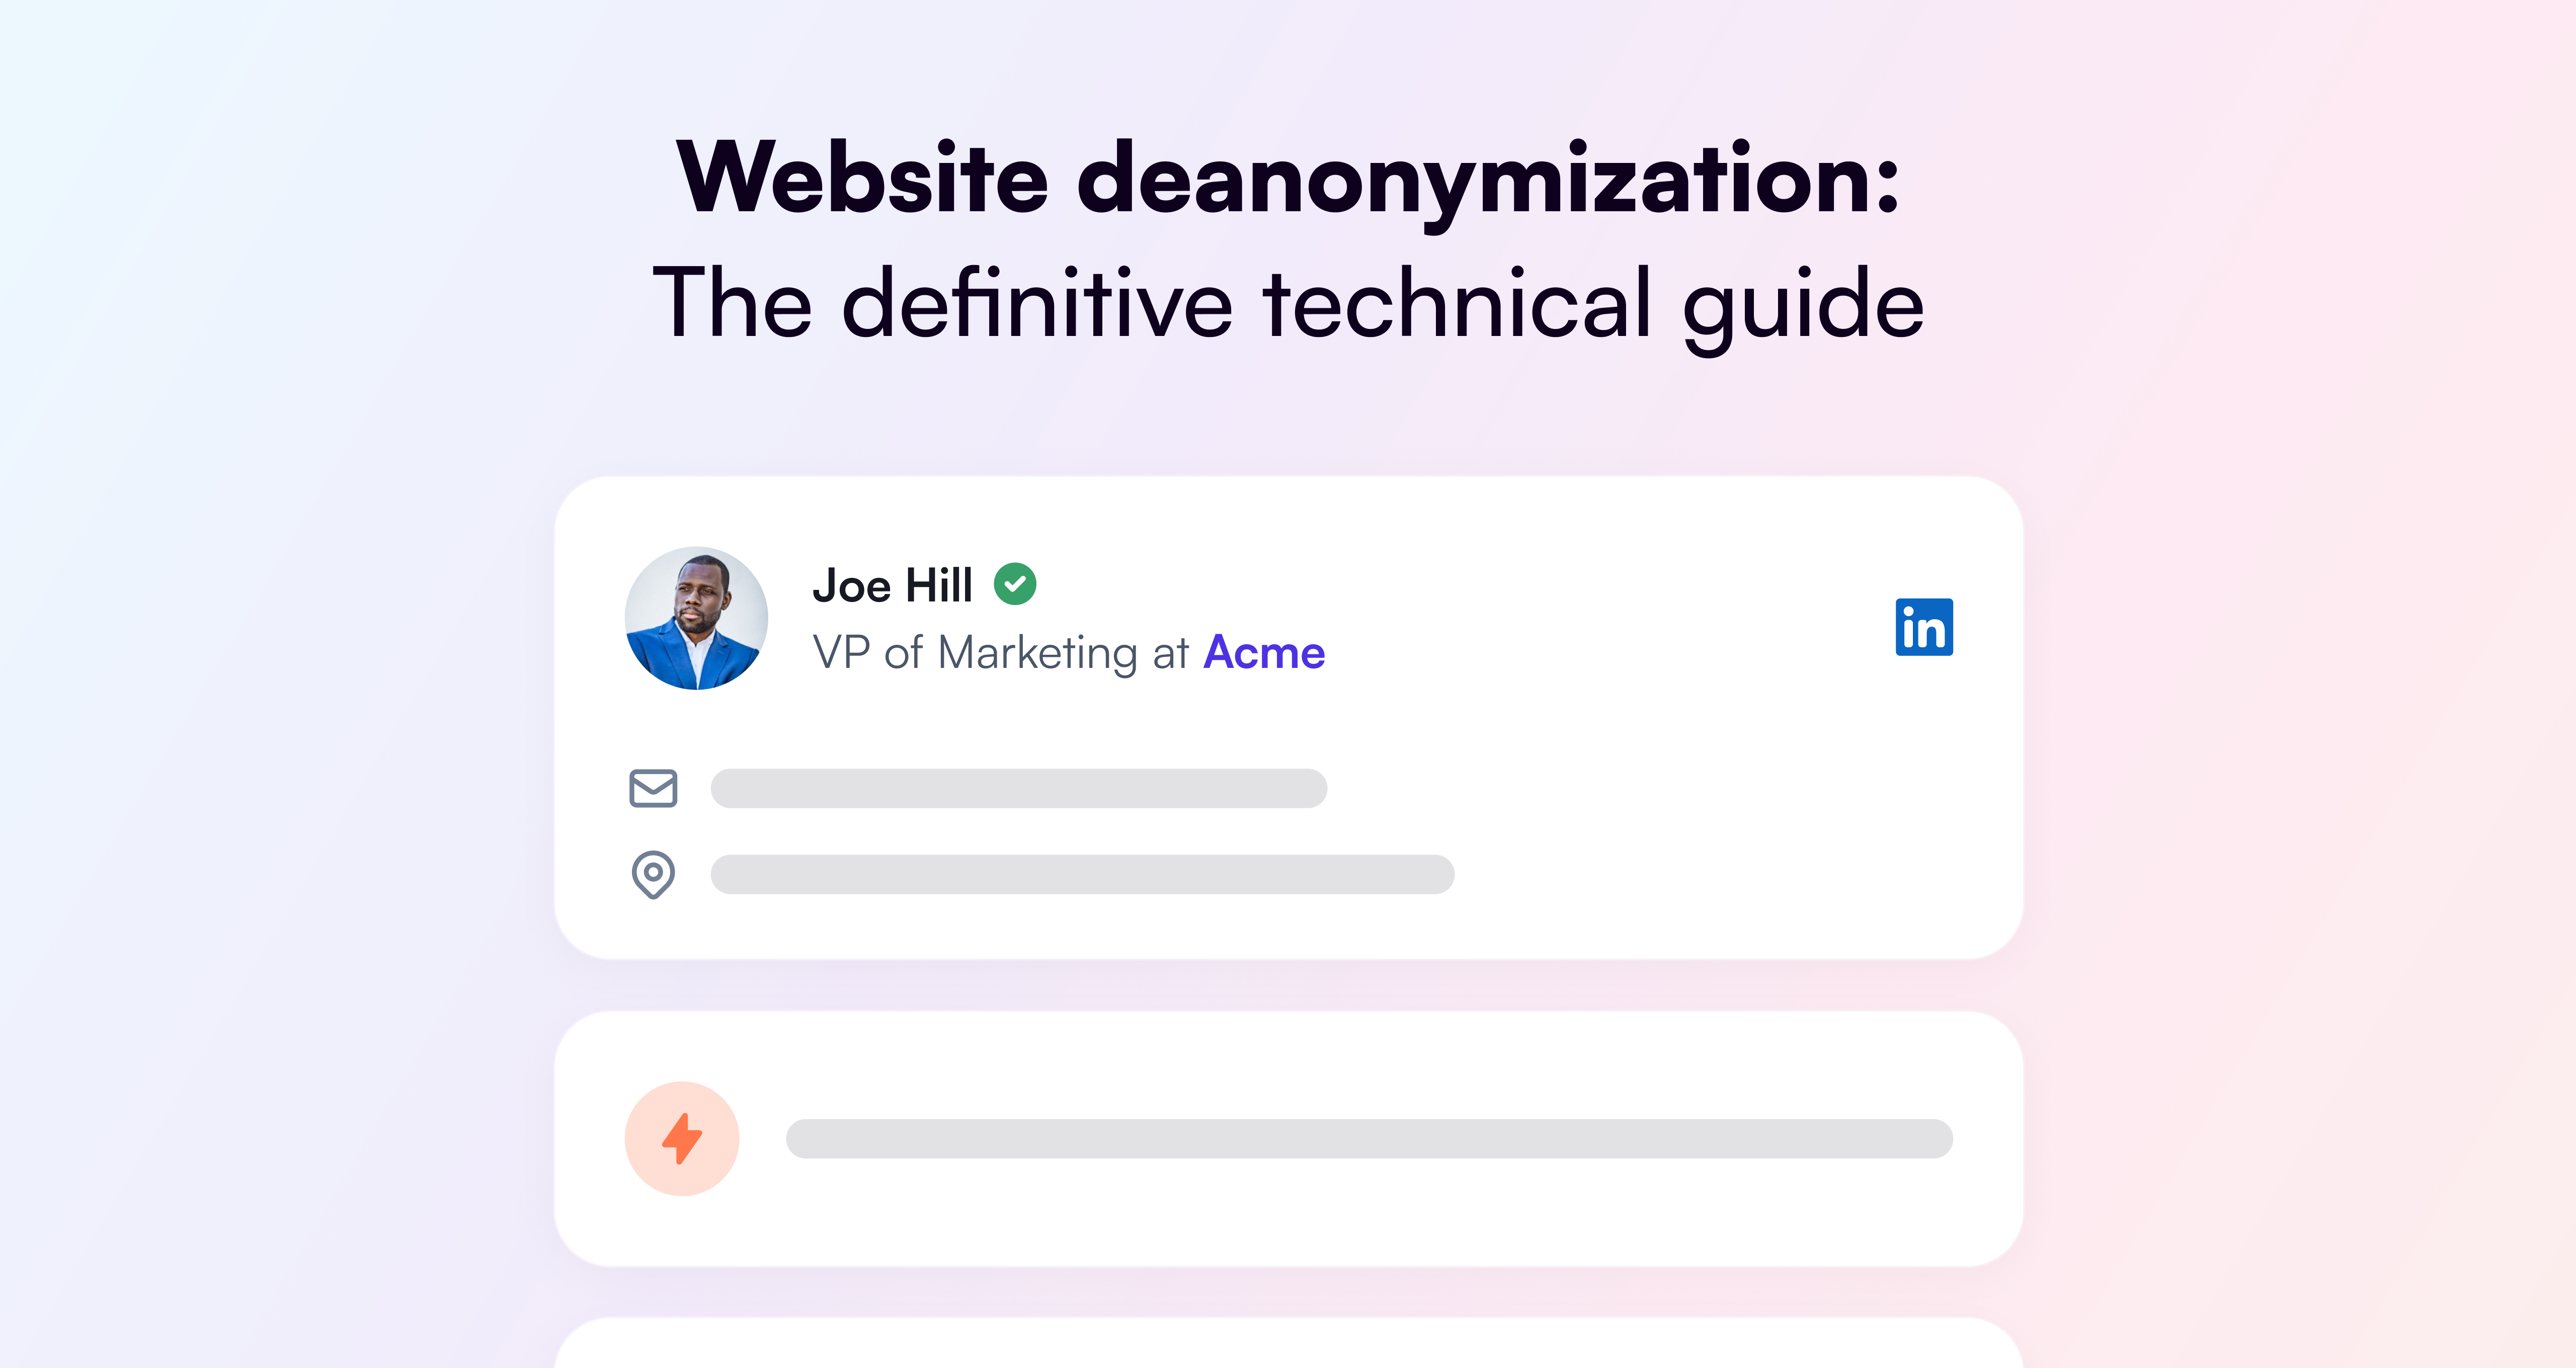 Part 1: Website deanonymization: the definitive technical guide